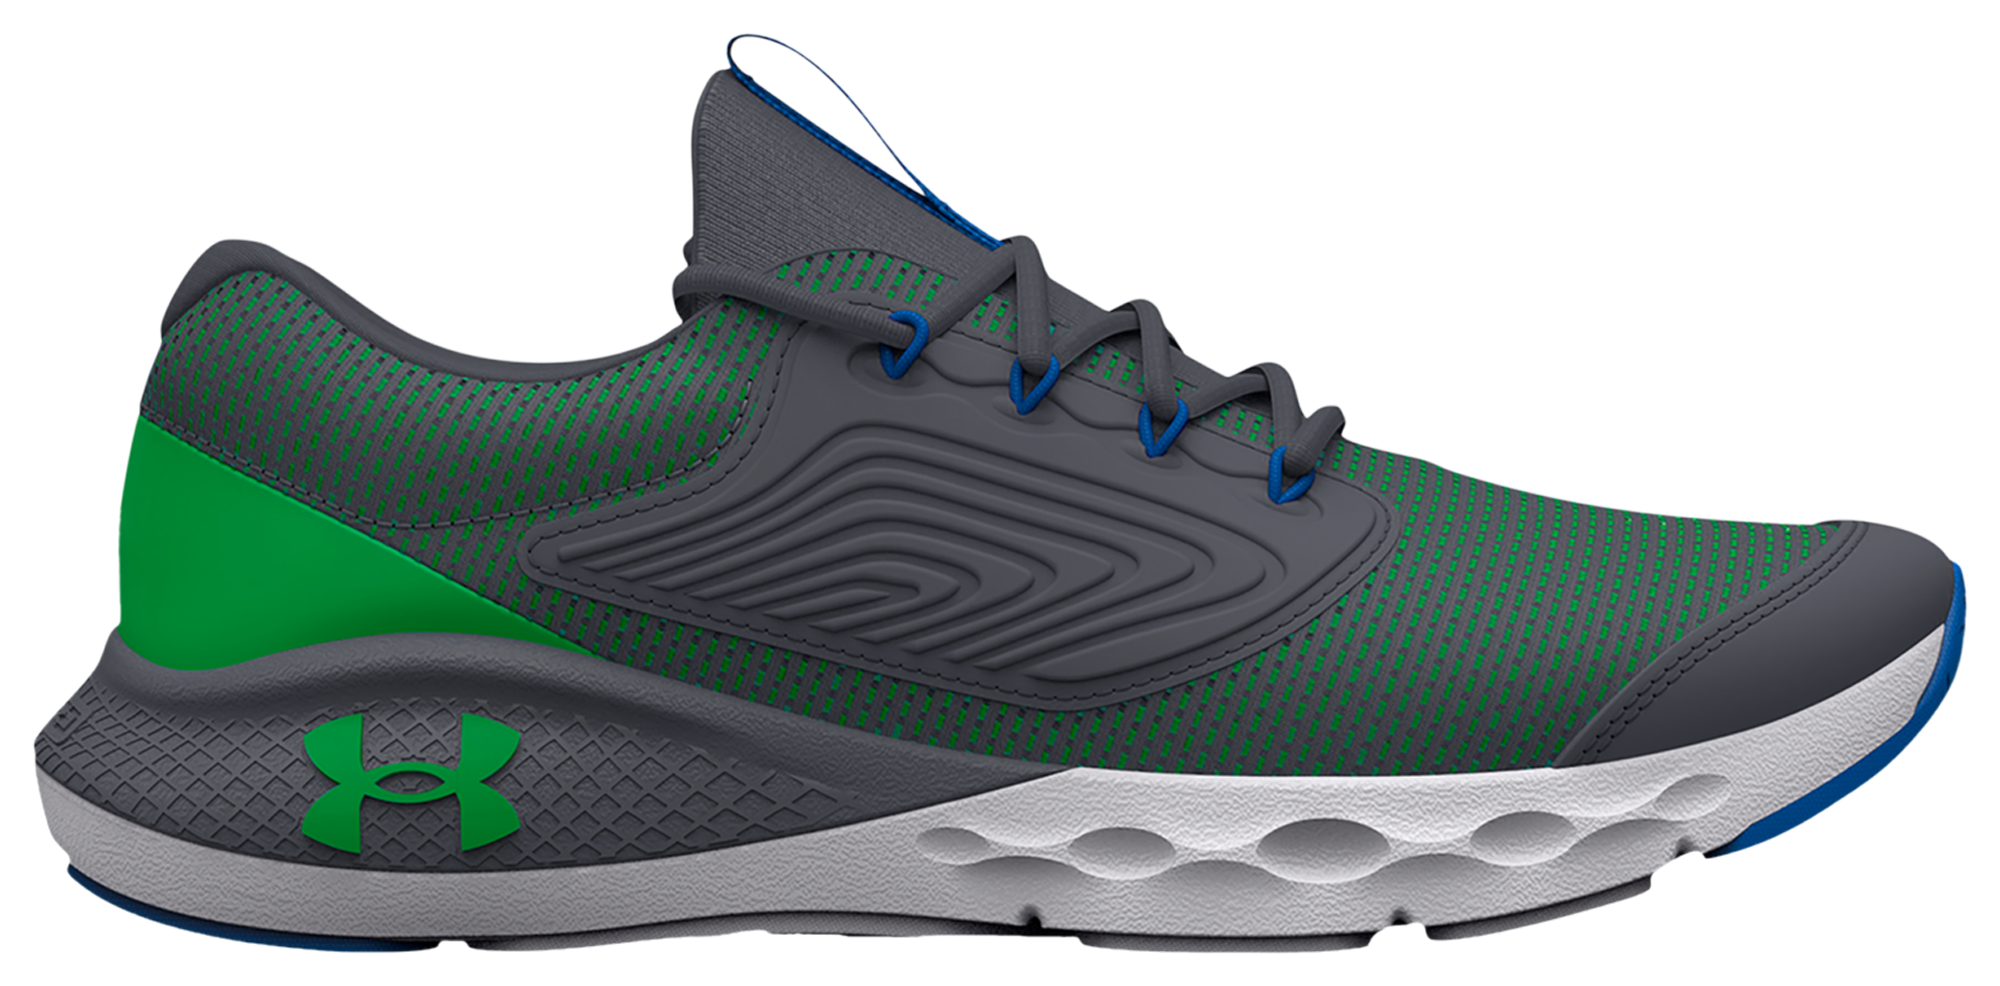 Under Armour Charged Vantage 2 | Foot Locker